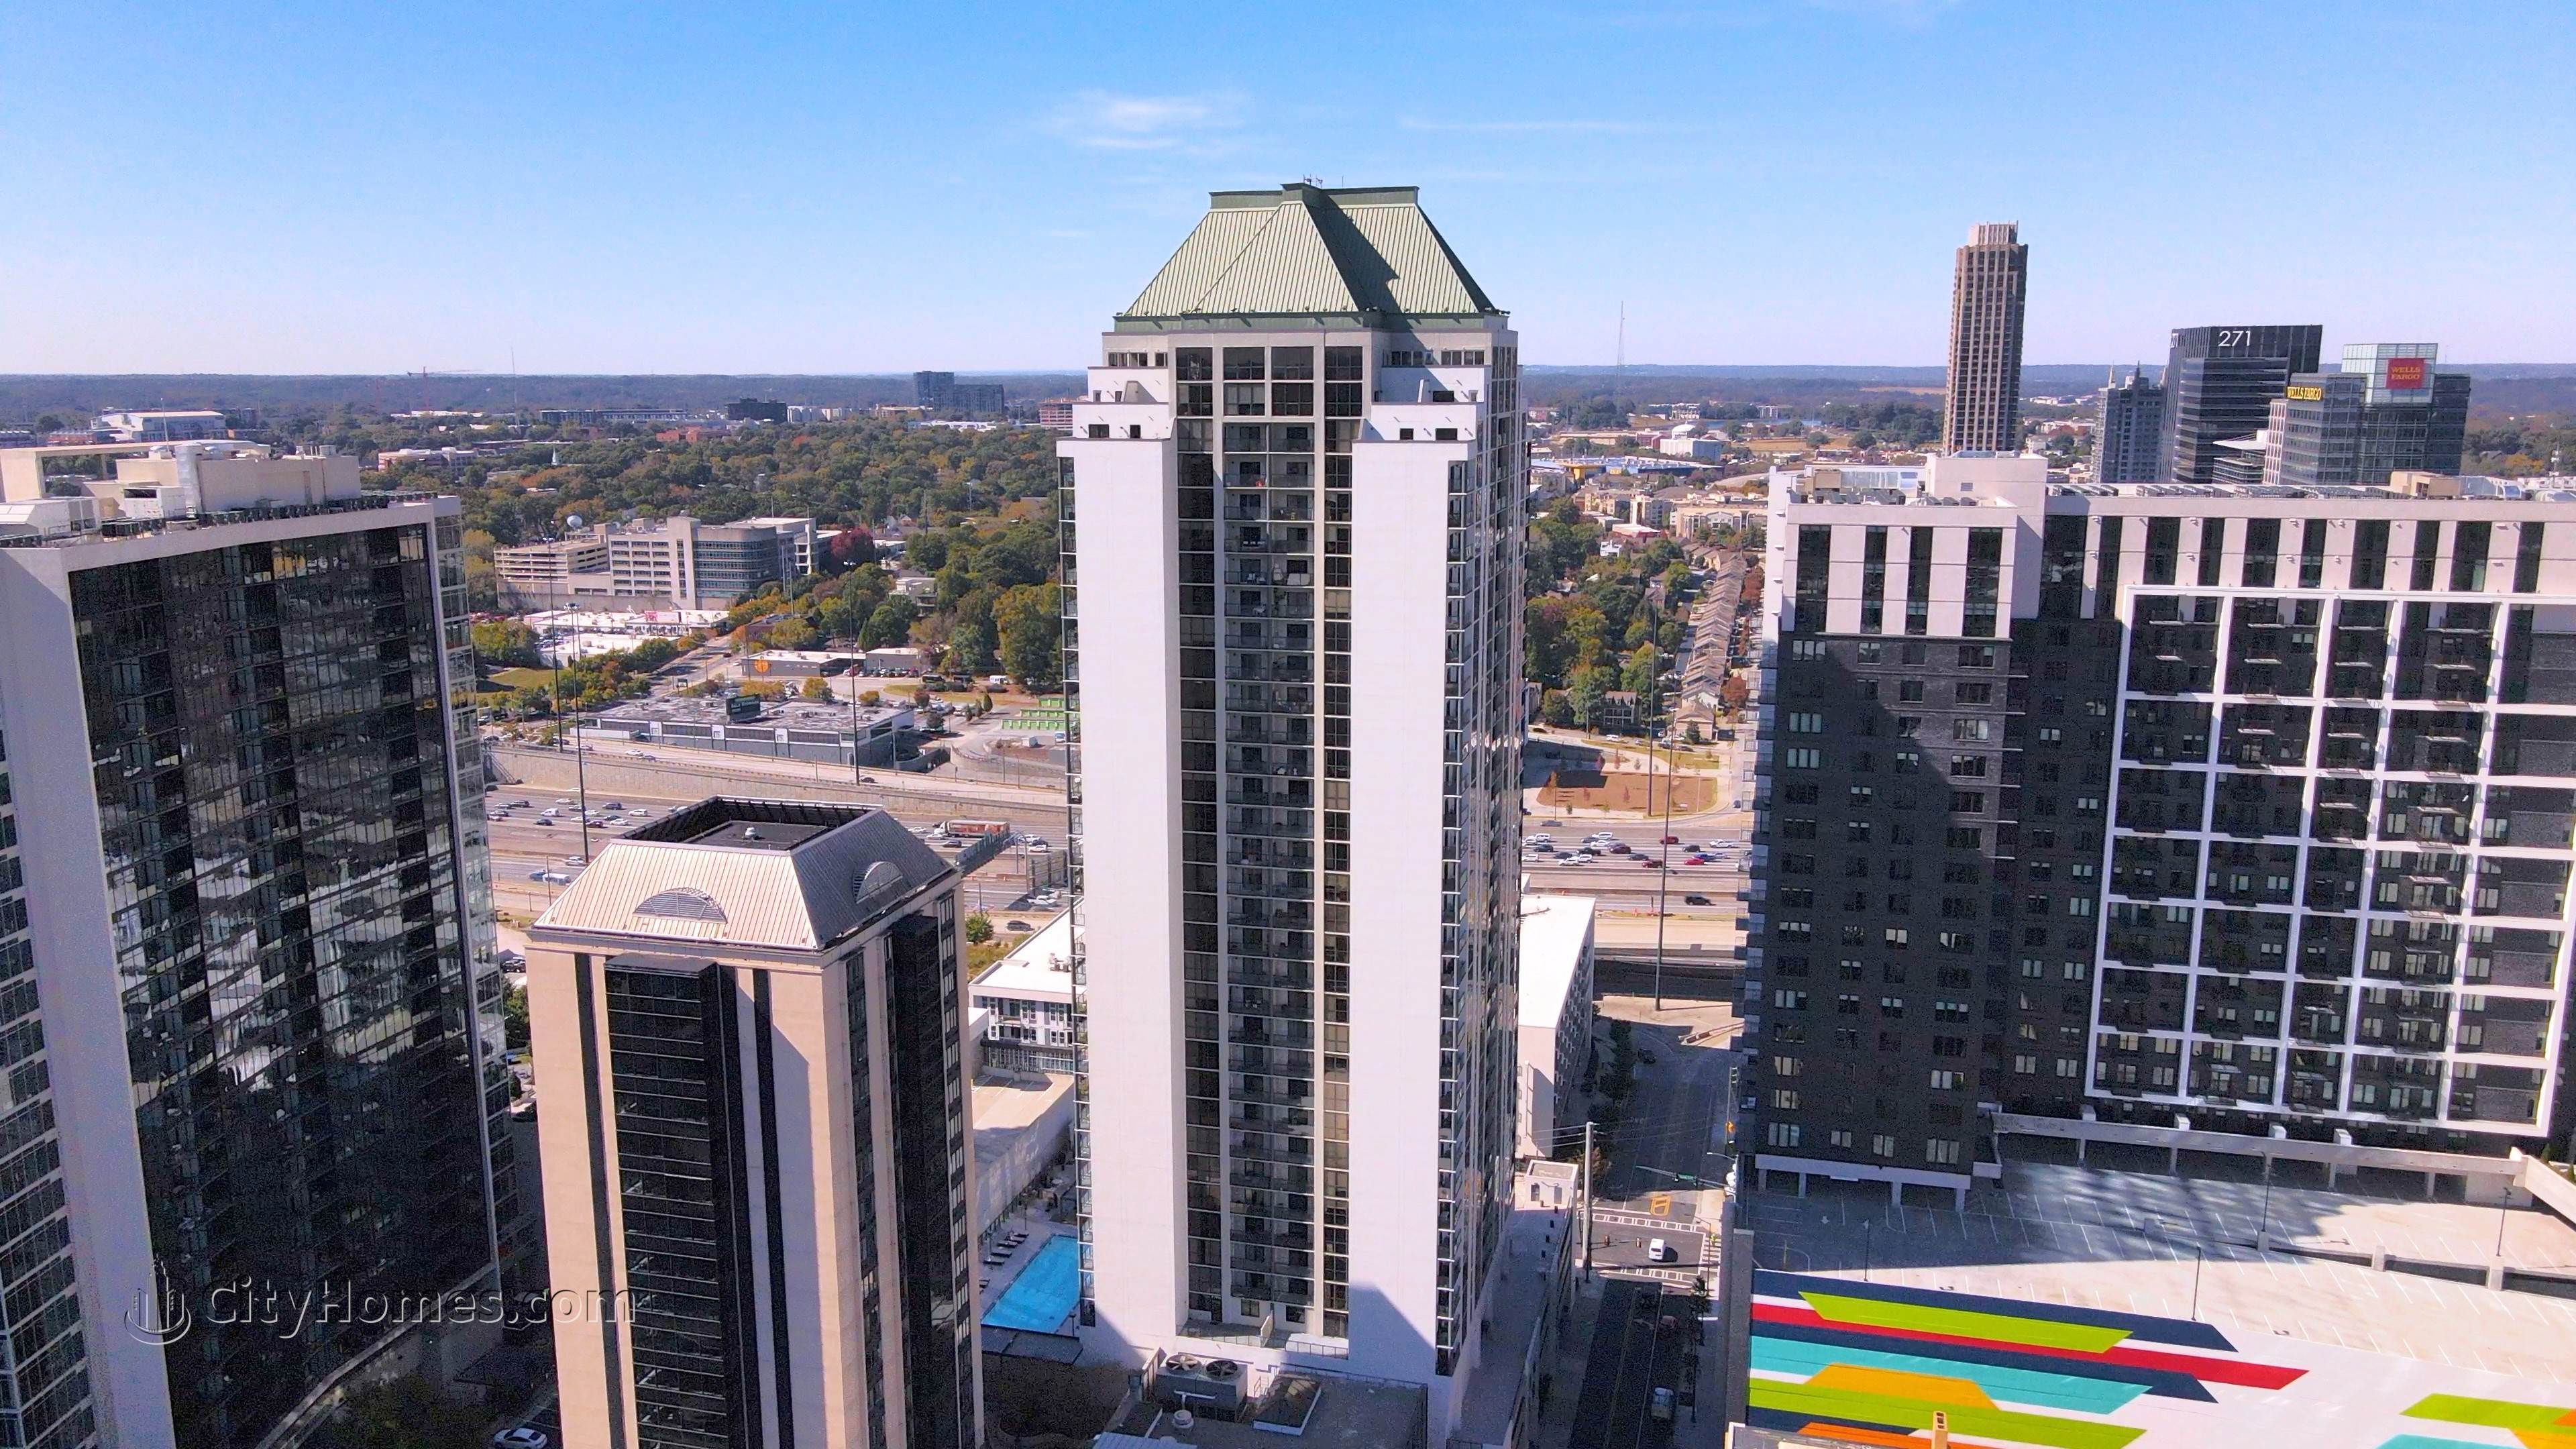 3. 1280 West Condos xây dựng tại 1280 West Peachtree St NW, Greater Midtown, Atlanta, GA 30309